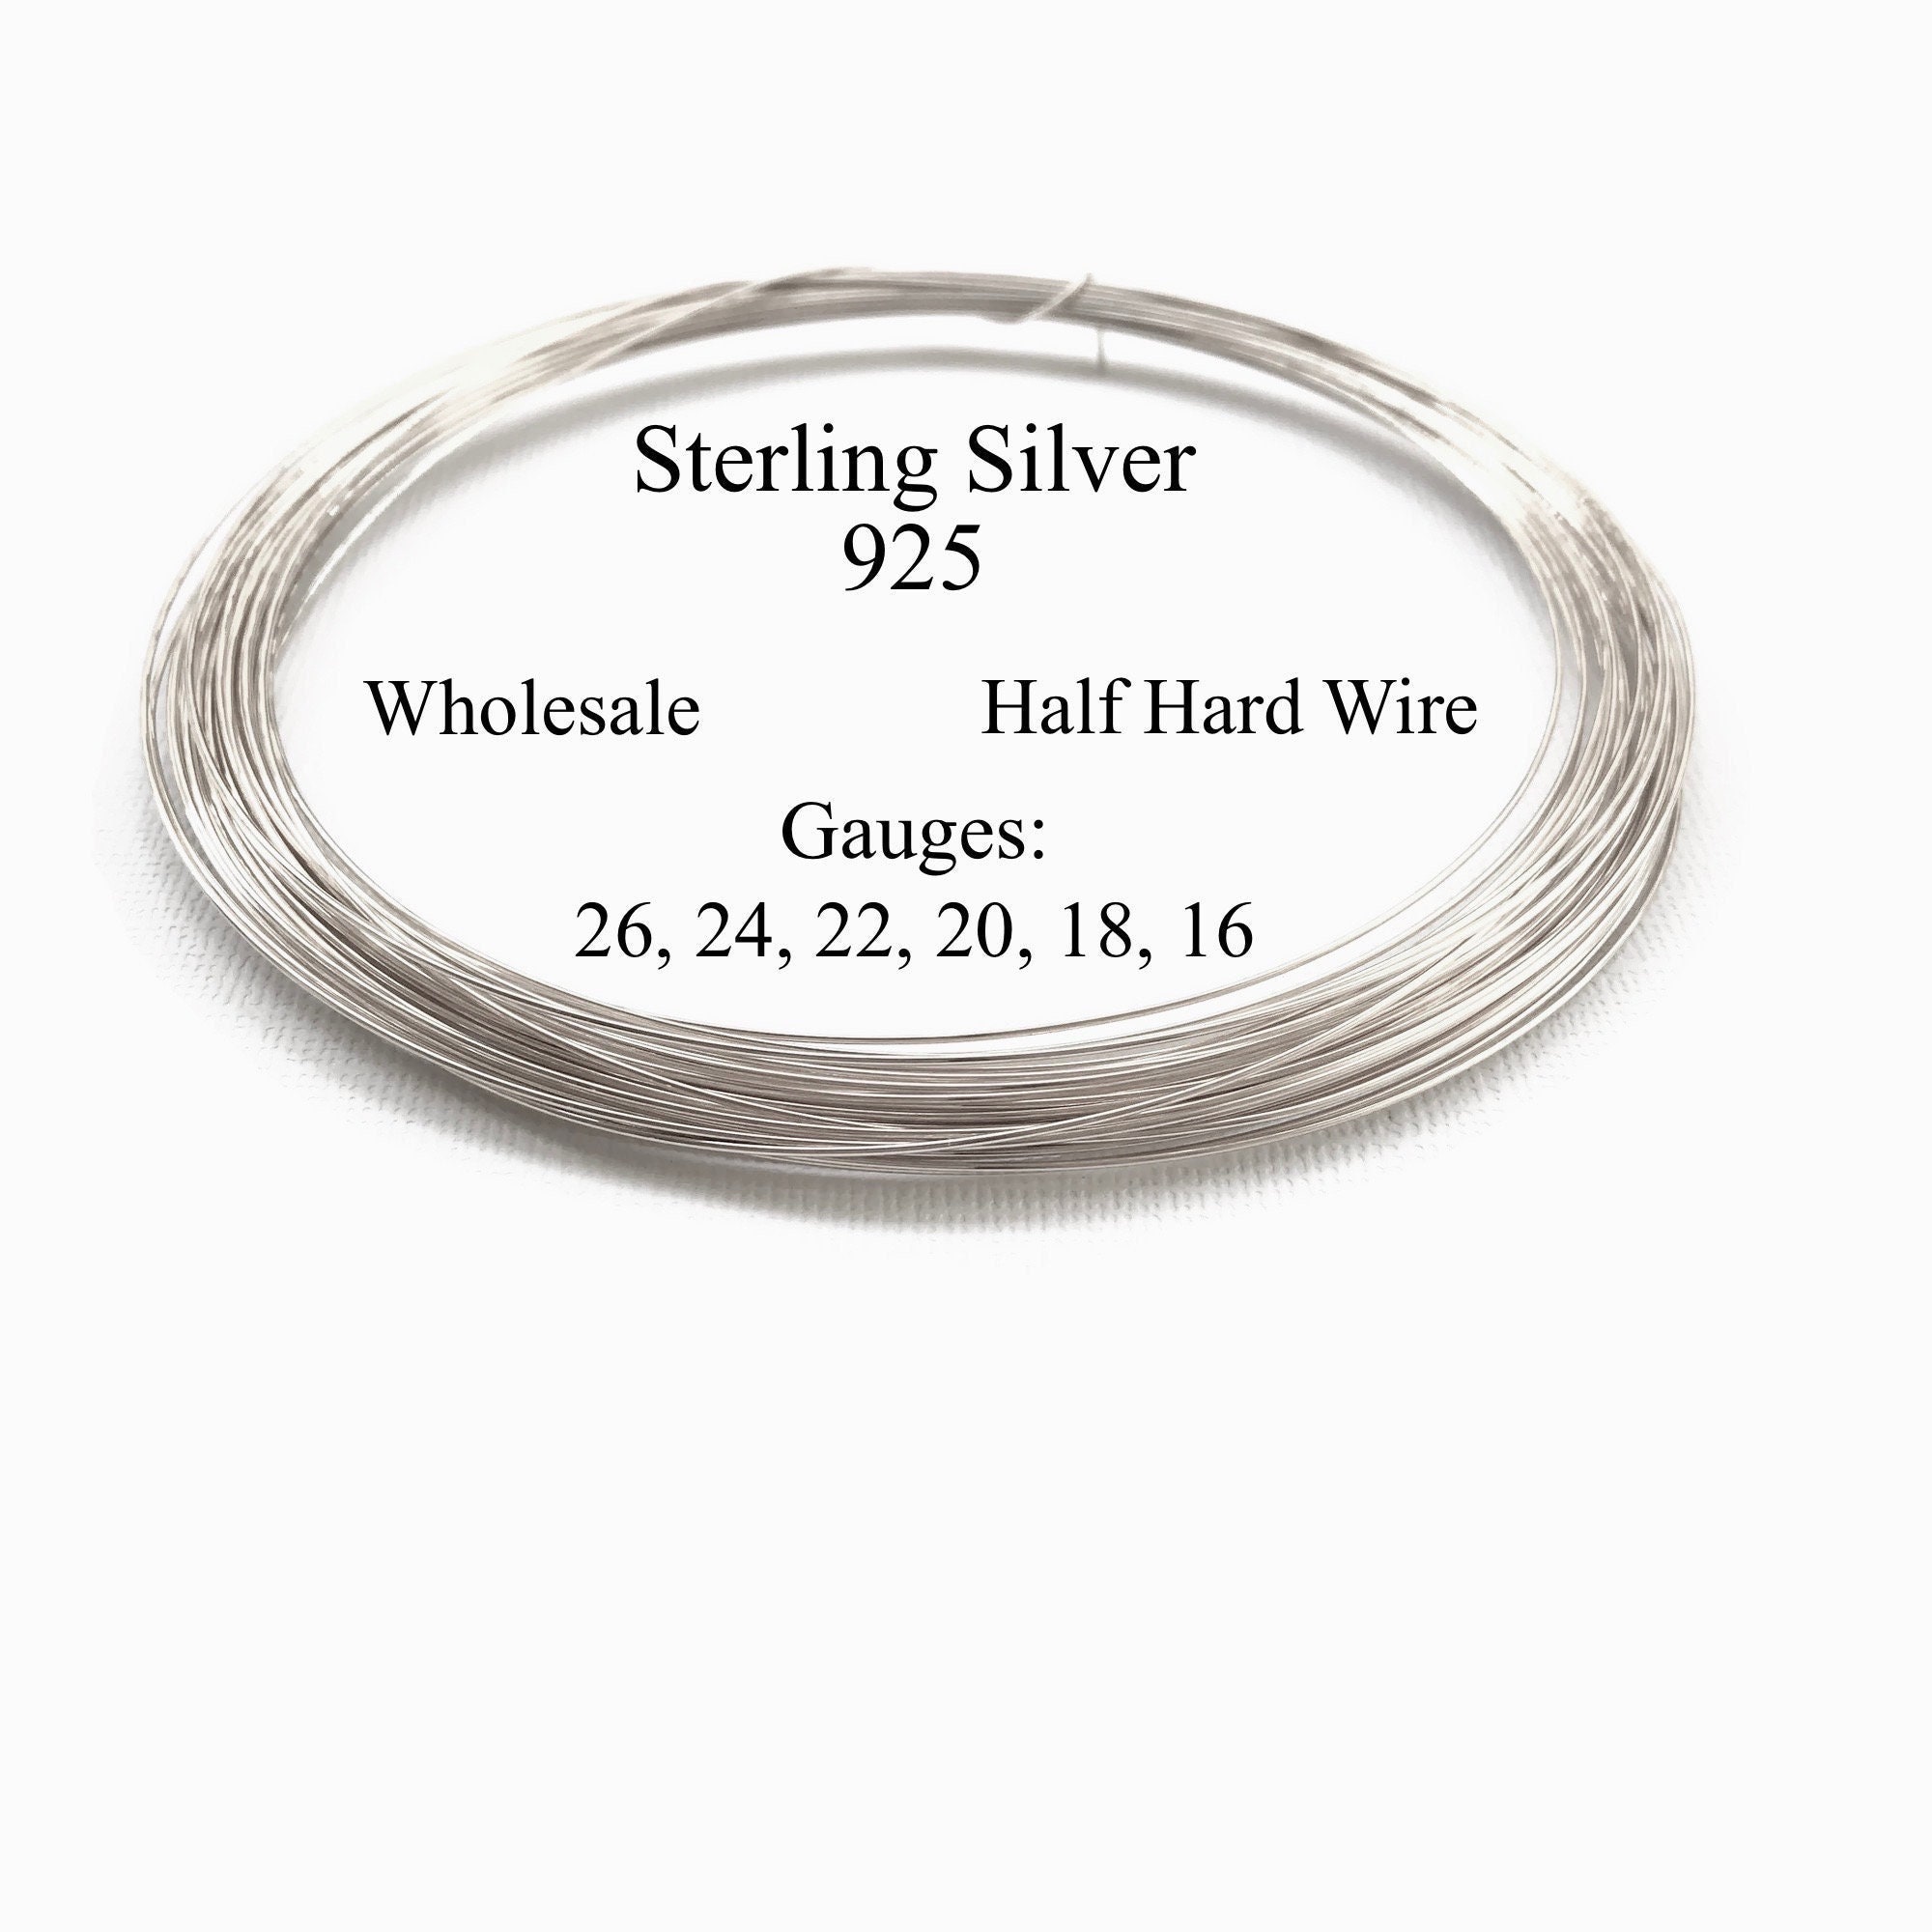 925 Sterling Silver Wire, Square, Half Hard, 16-24 Gauge, 1-10 ft, USA